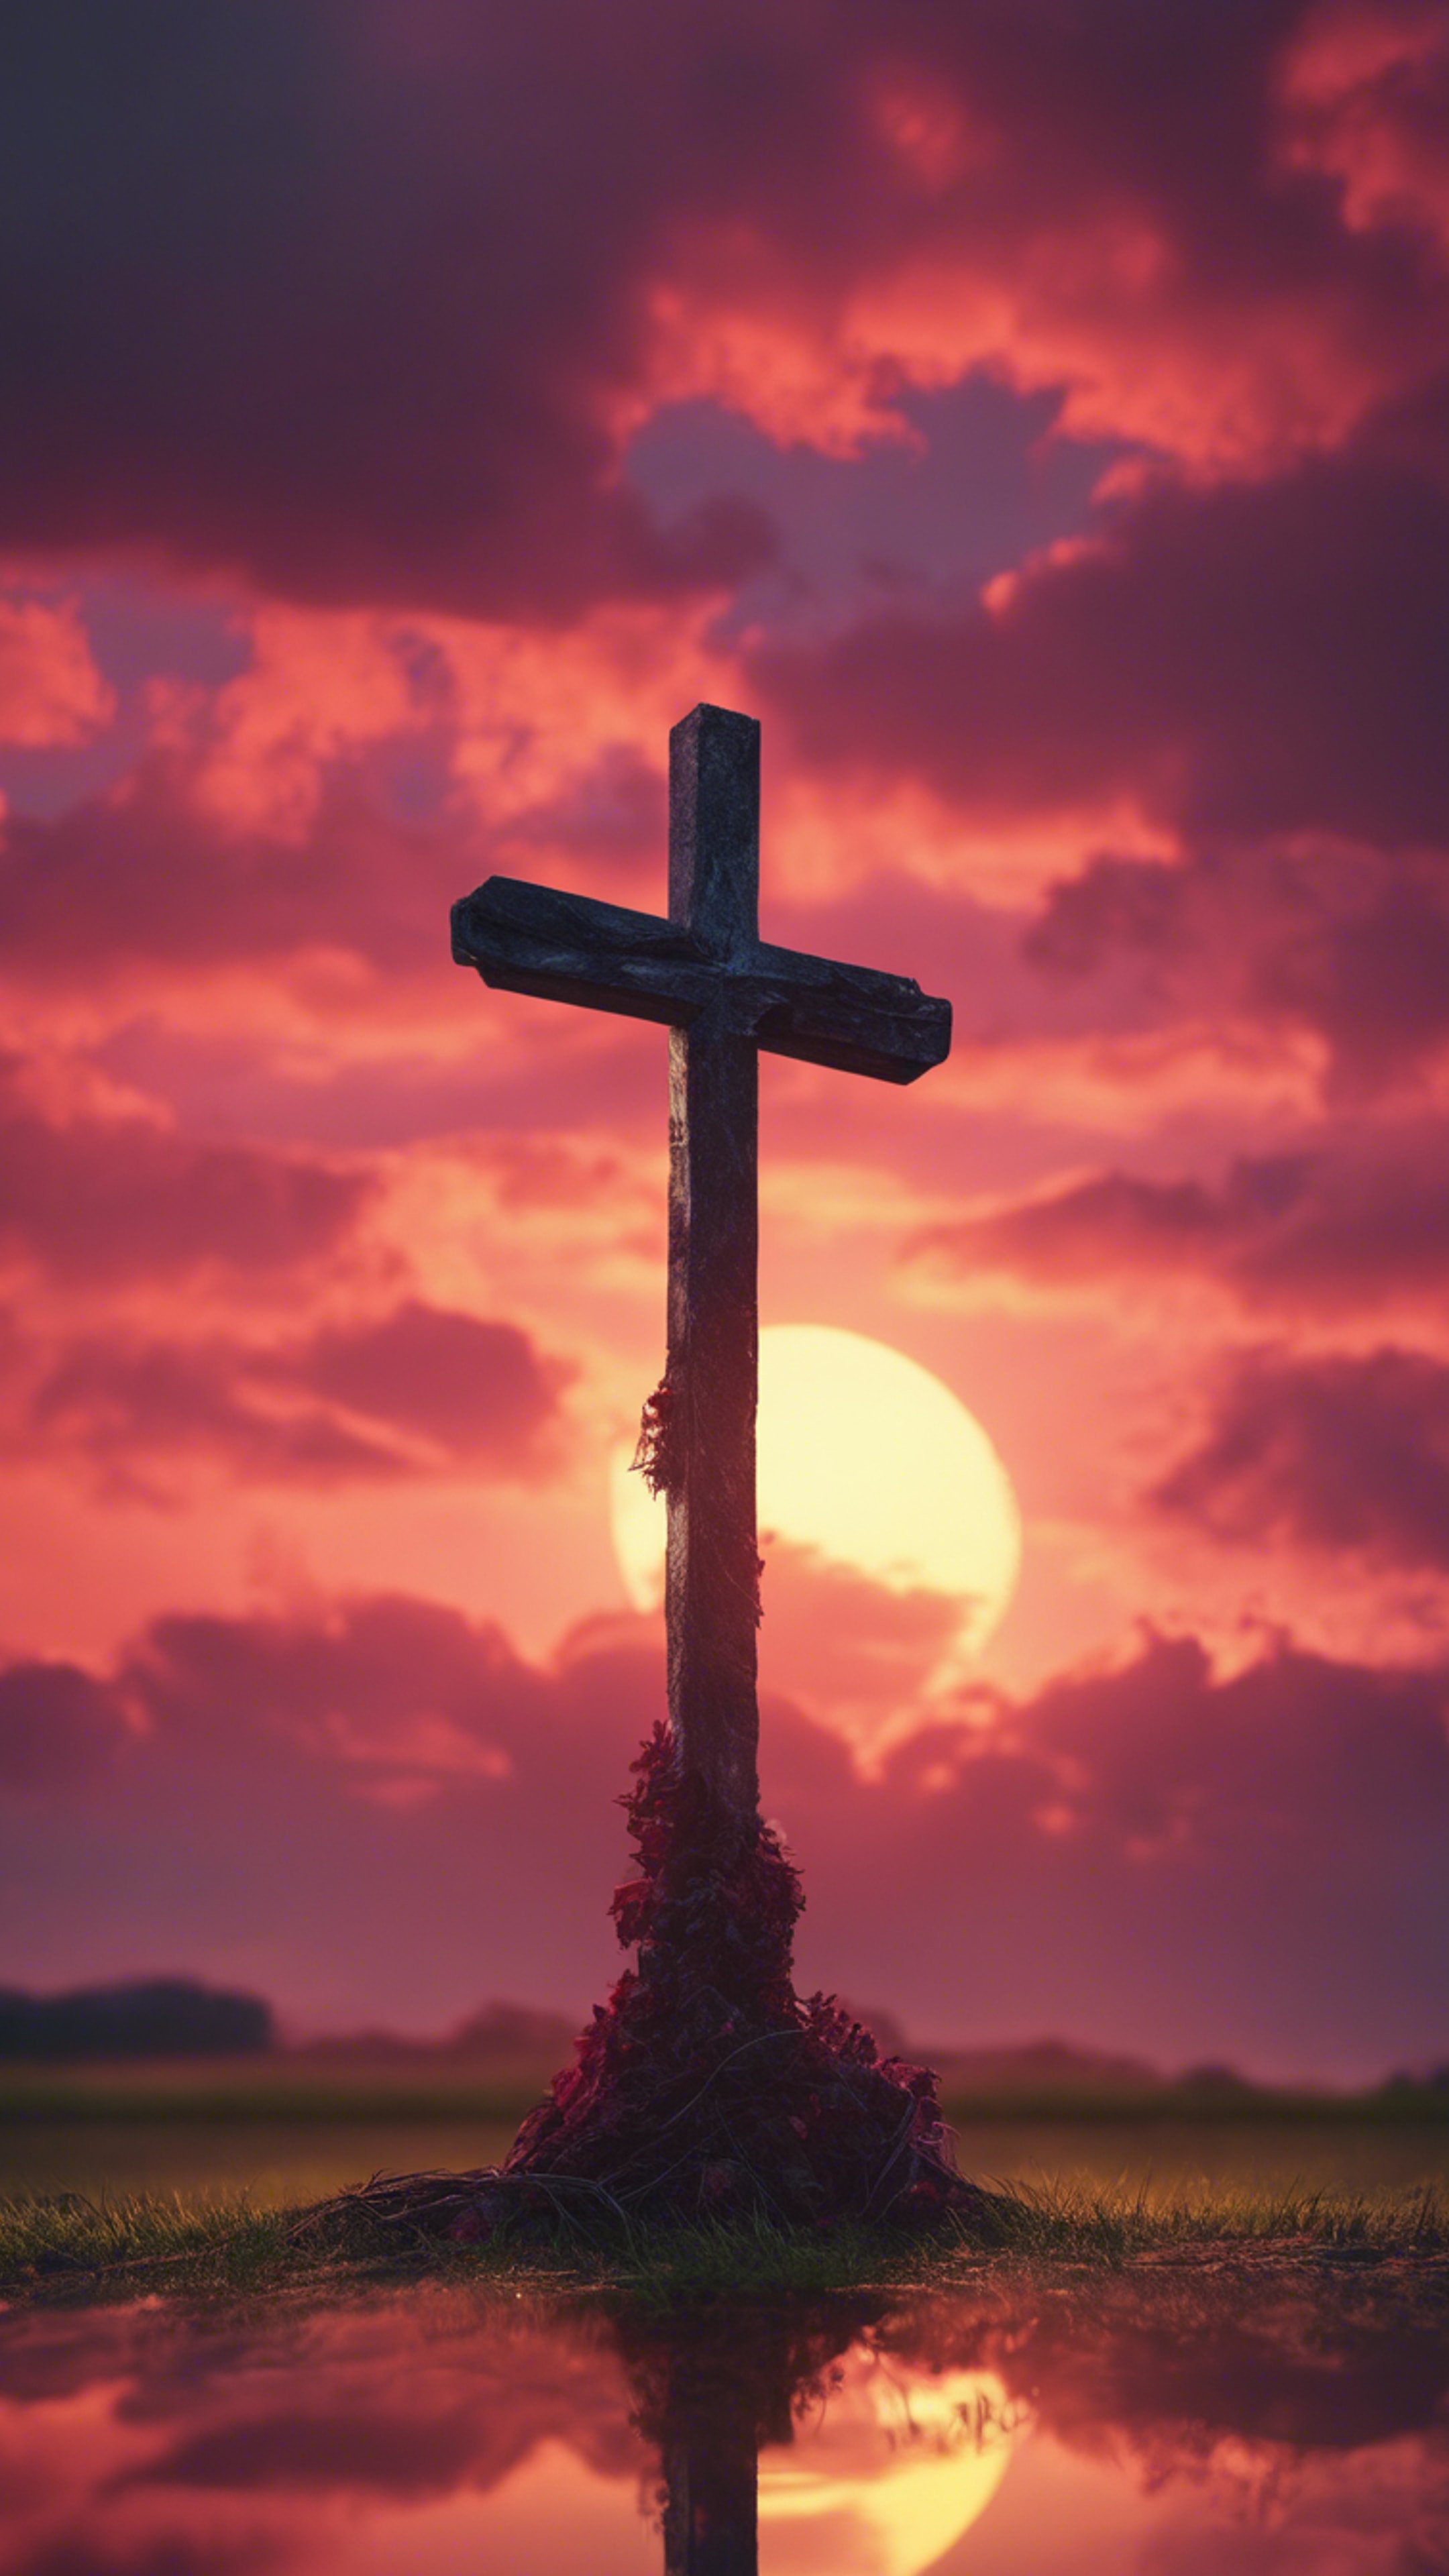 A cross standing against the crimson colors of a sunset sky. Шпалери[b41808c7967b41aa9e40]